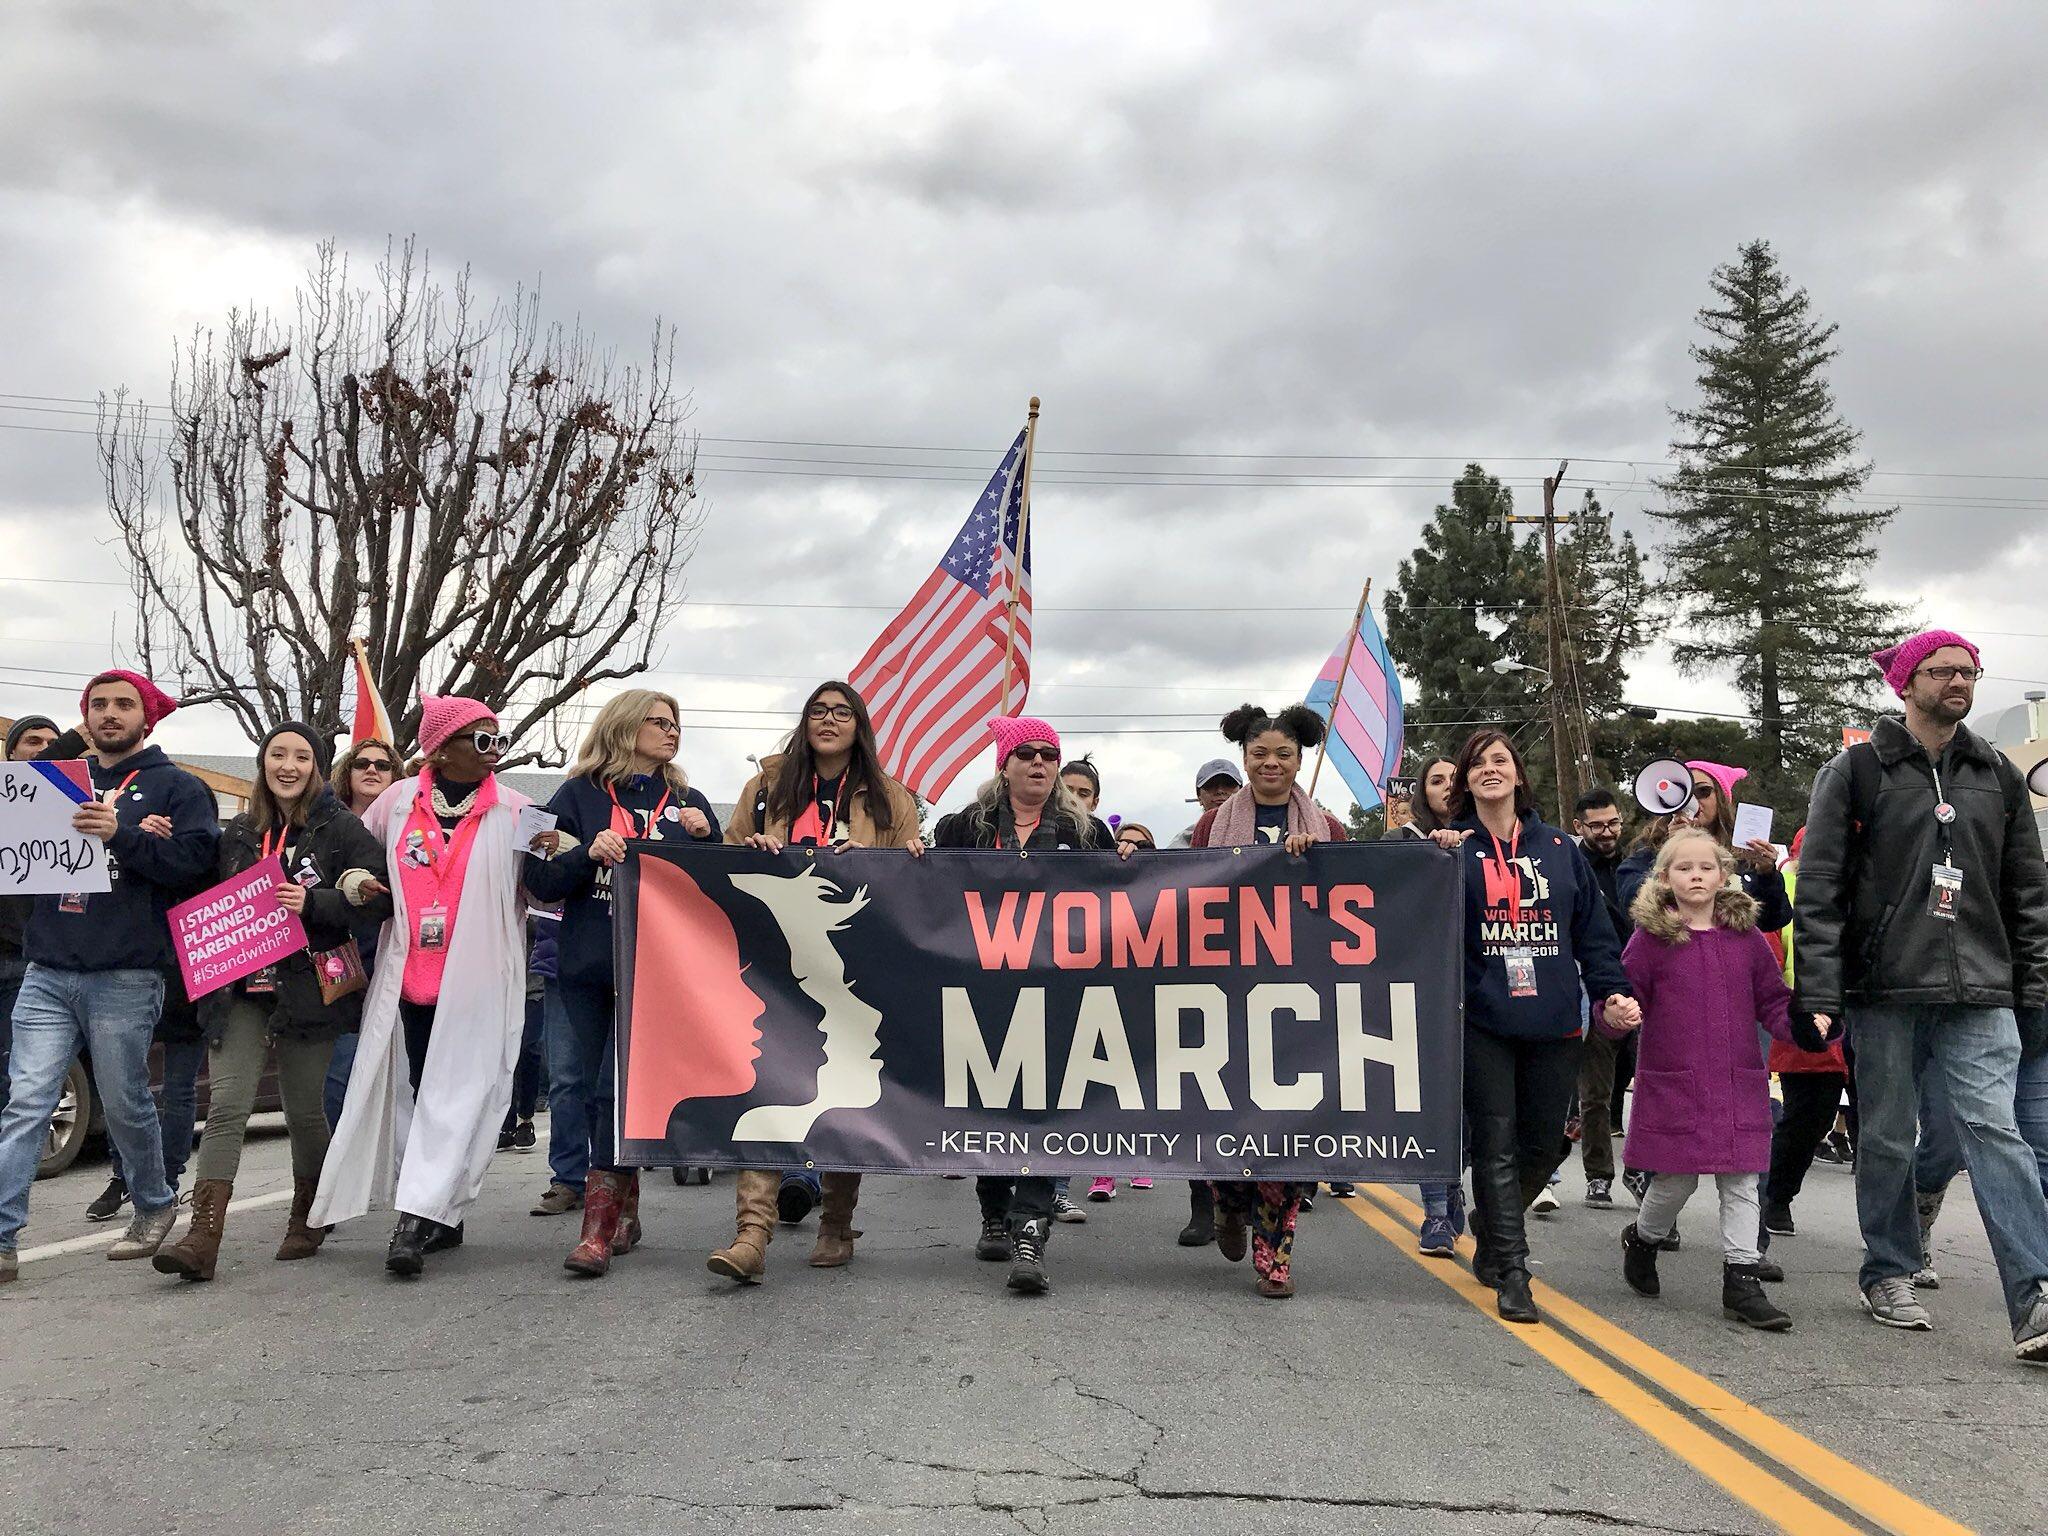 Women's March Makes Its Way To Conservative Kern County | Valley Public Radio